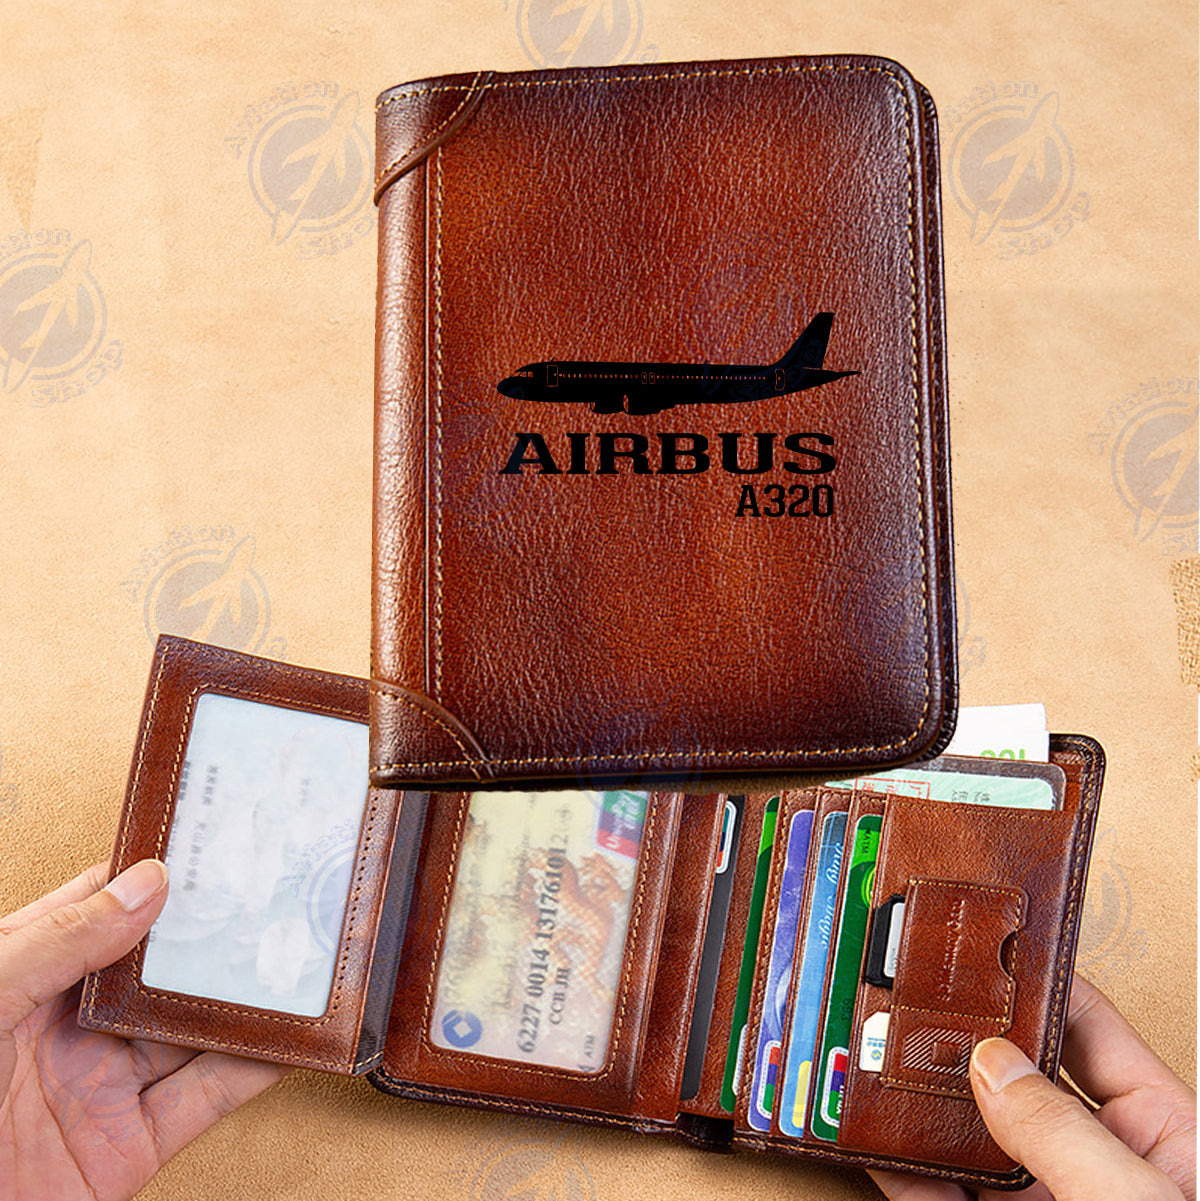 Airbus A320 Printed Designed Leather Wallets